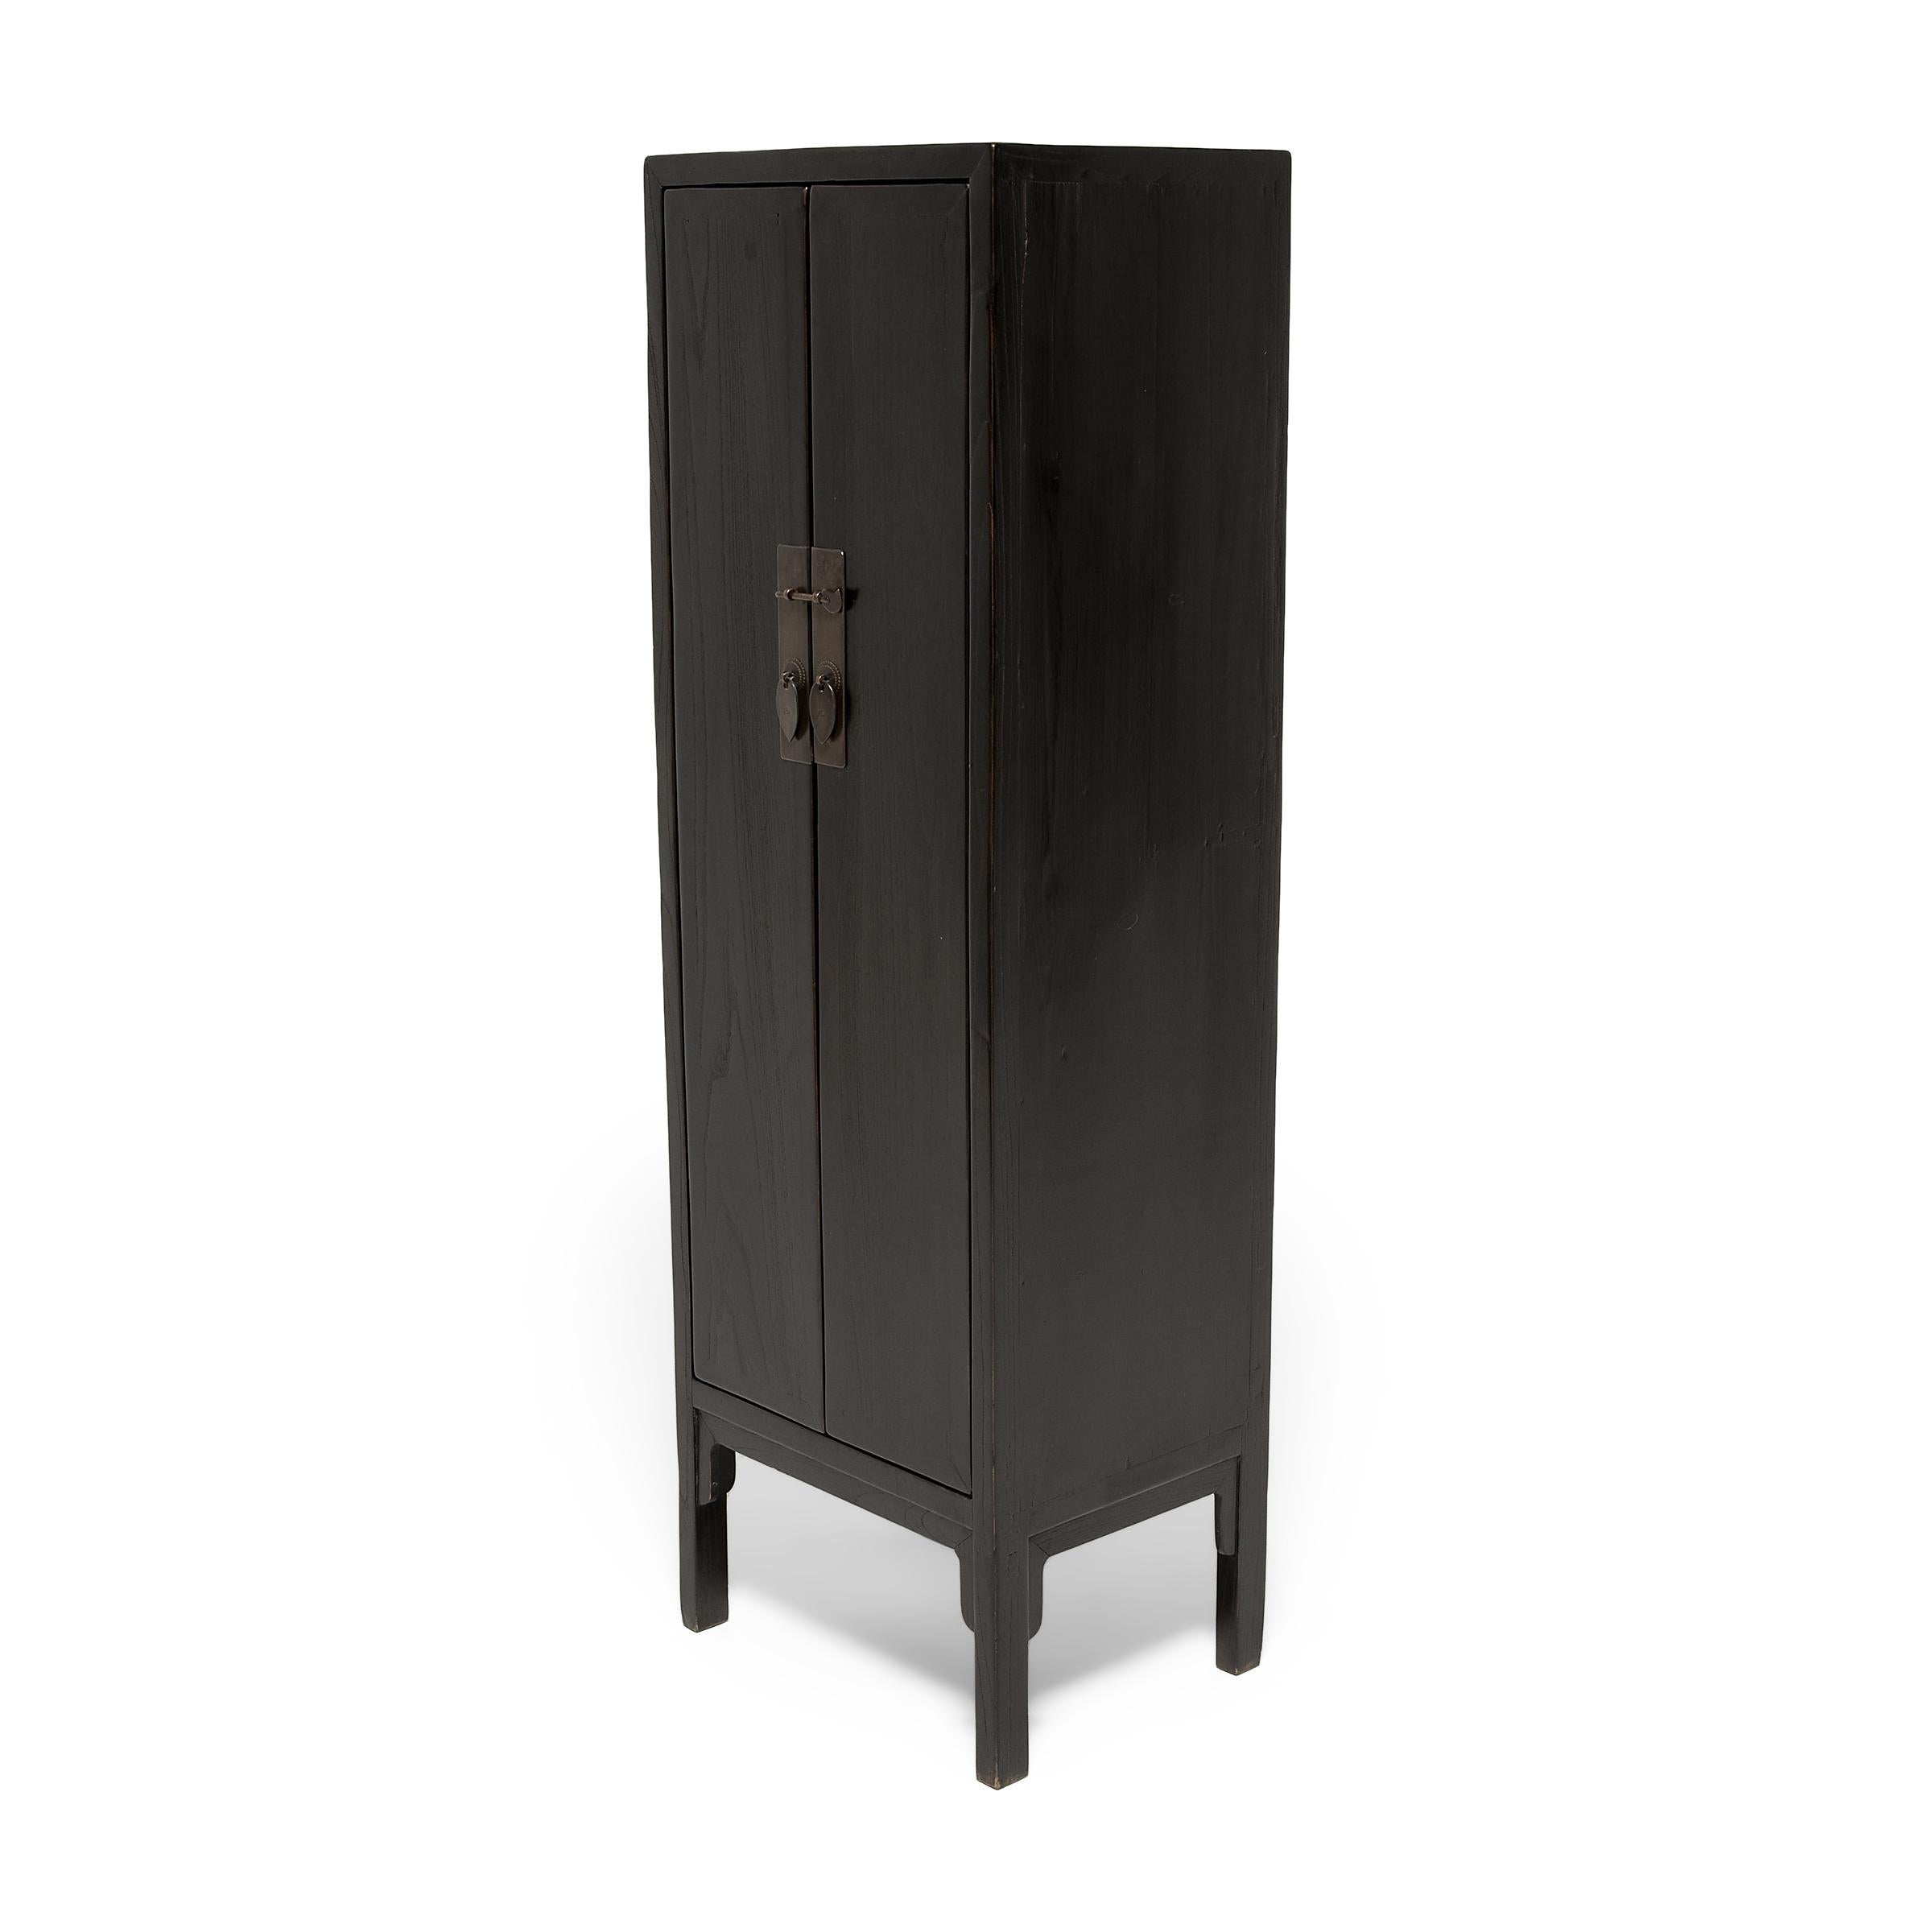 This upright cabinet from northern China has a timeless and minimal design that blends into any interior. The narrow cabinet has a simple, angular form with square corners, straight legs, and elongated doors that run the full length of the cabinet